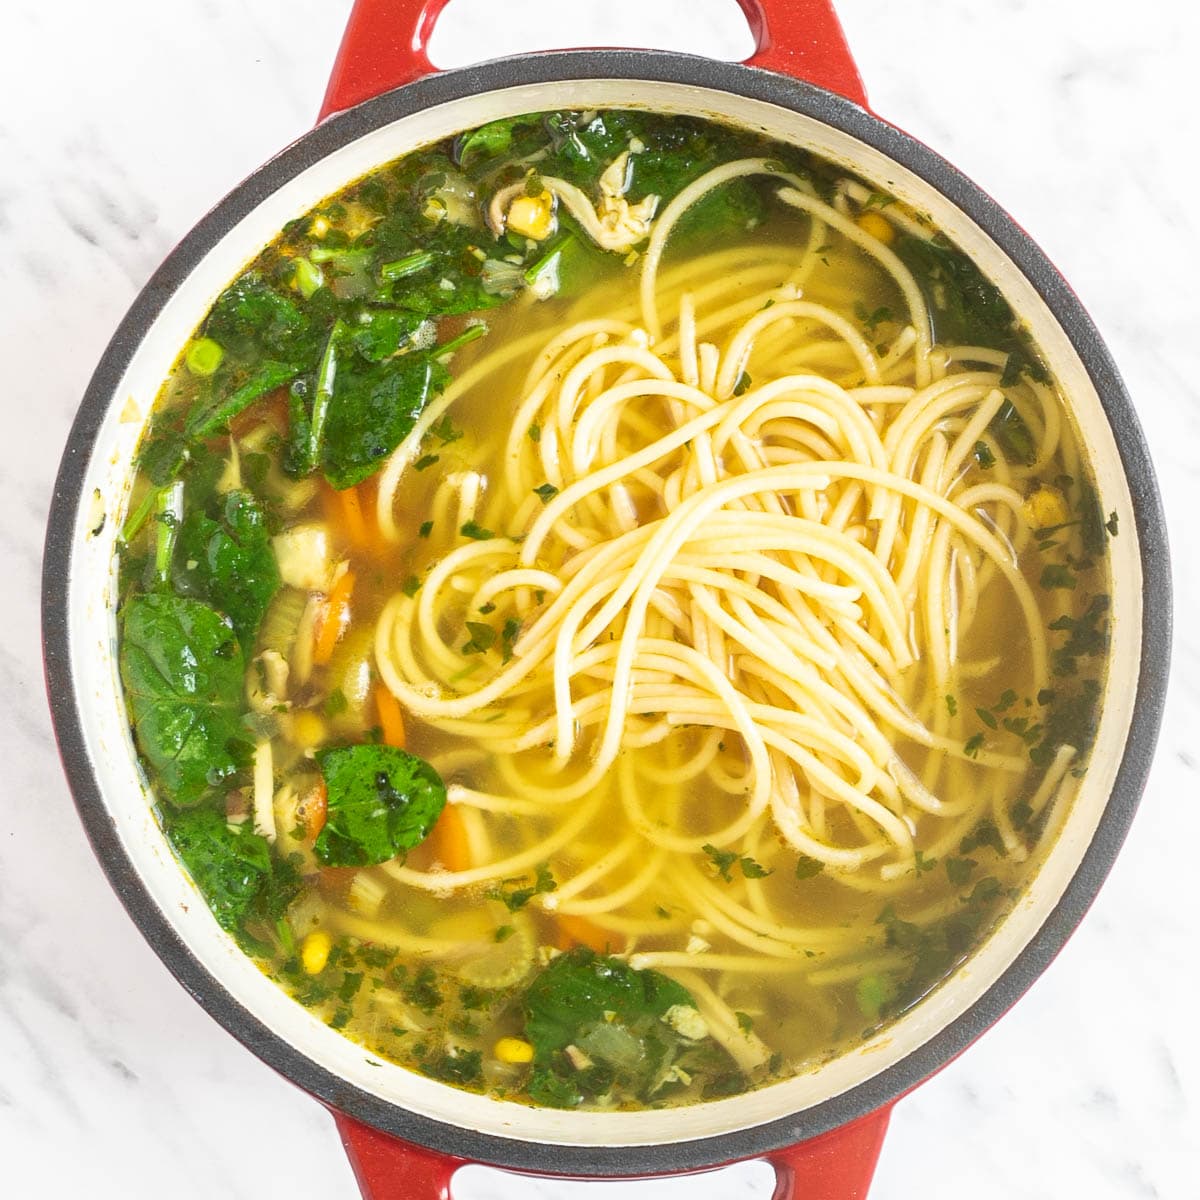 Red Dutch oven with sliced carrots, chopped parsnip, chopped celeriac, celery stalk, shredded oyster mushrooms, chopped herbs, fresh spinach leaves, corn, green peas, and noodles in a thin vegetable broth-like soup.